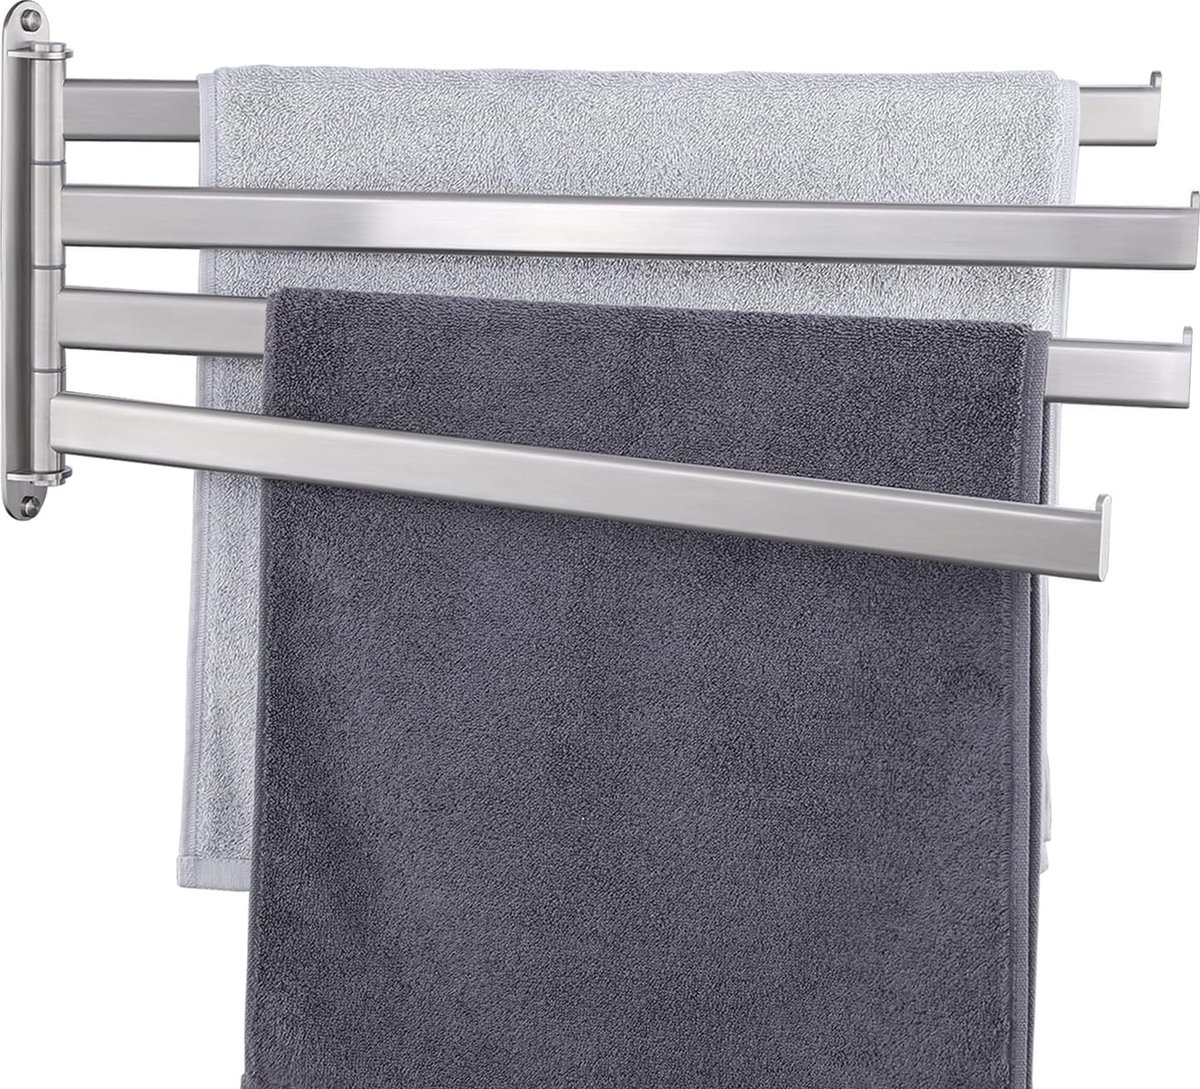 Swivelling Towel Rail 4 Arms Bathroom Stainless Steel Bath Towel Holder 50 cm 180° Rotation Brushed A2104S4L50-2